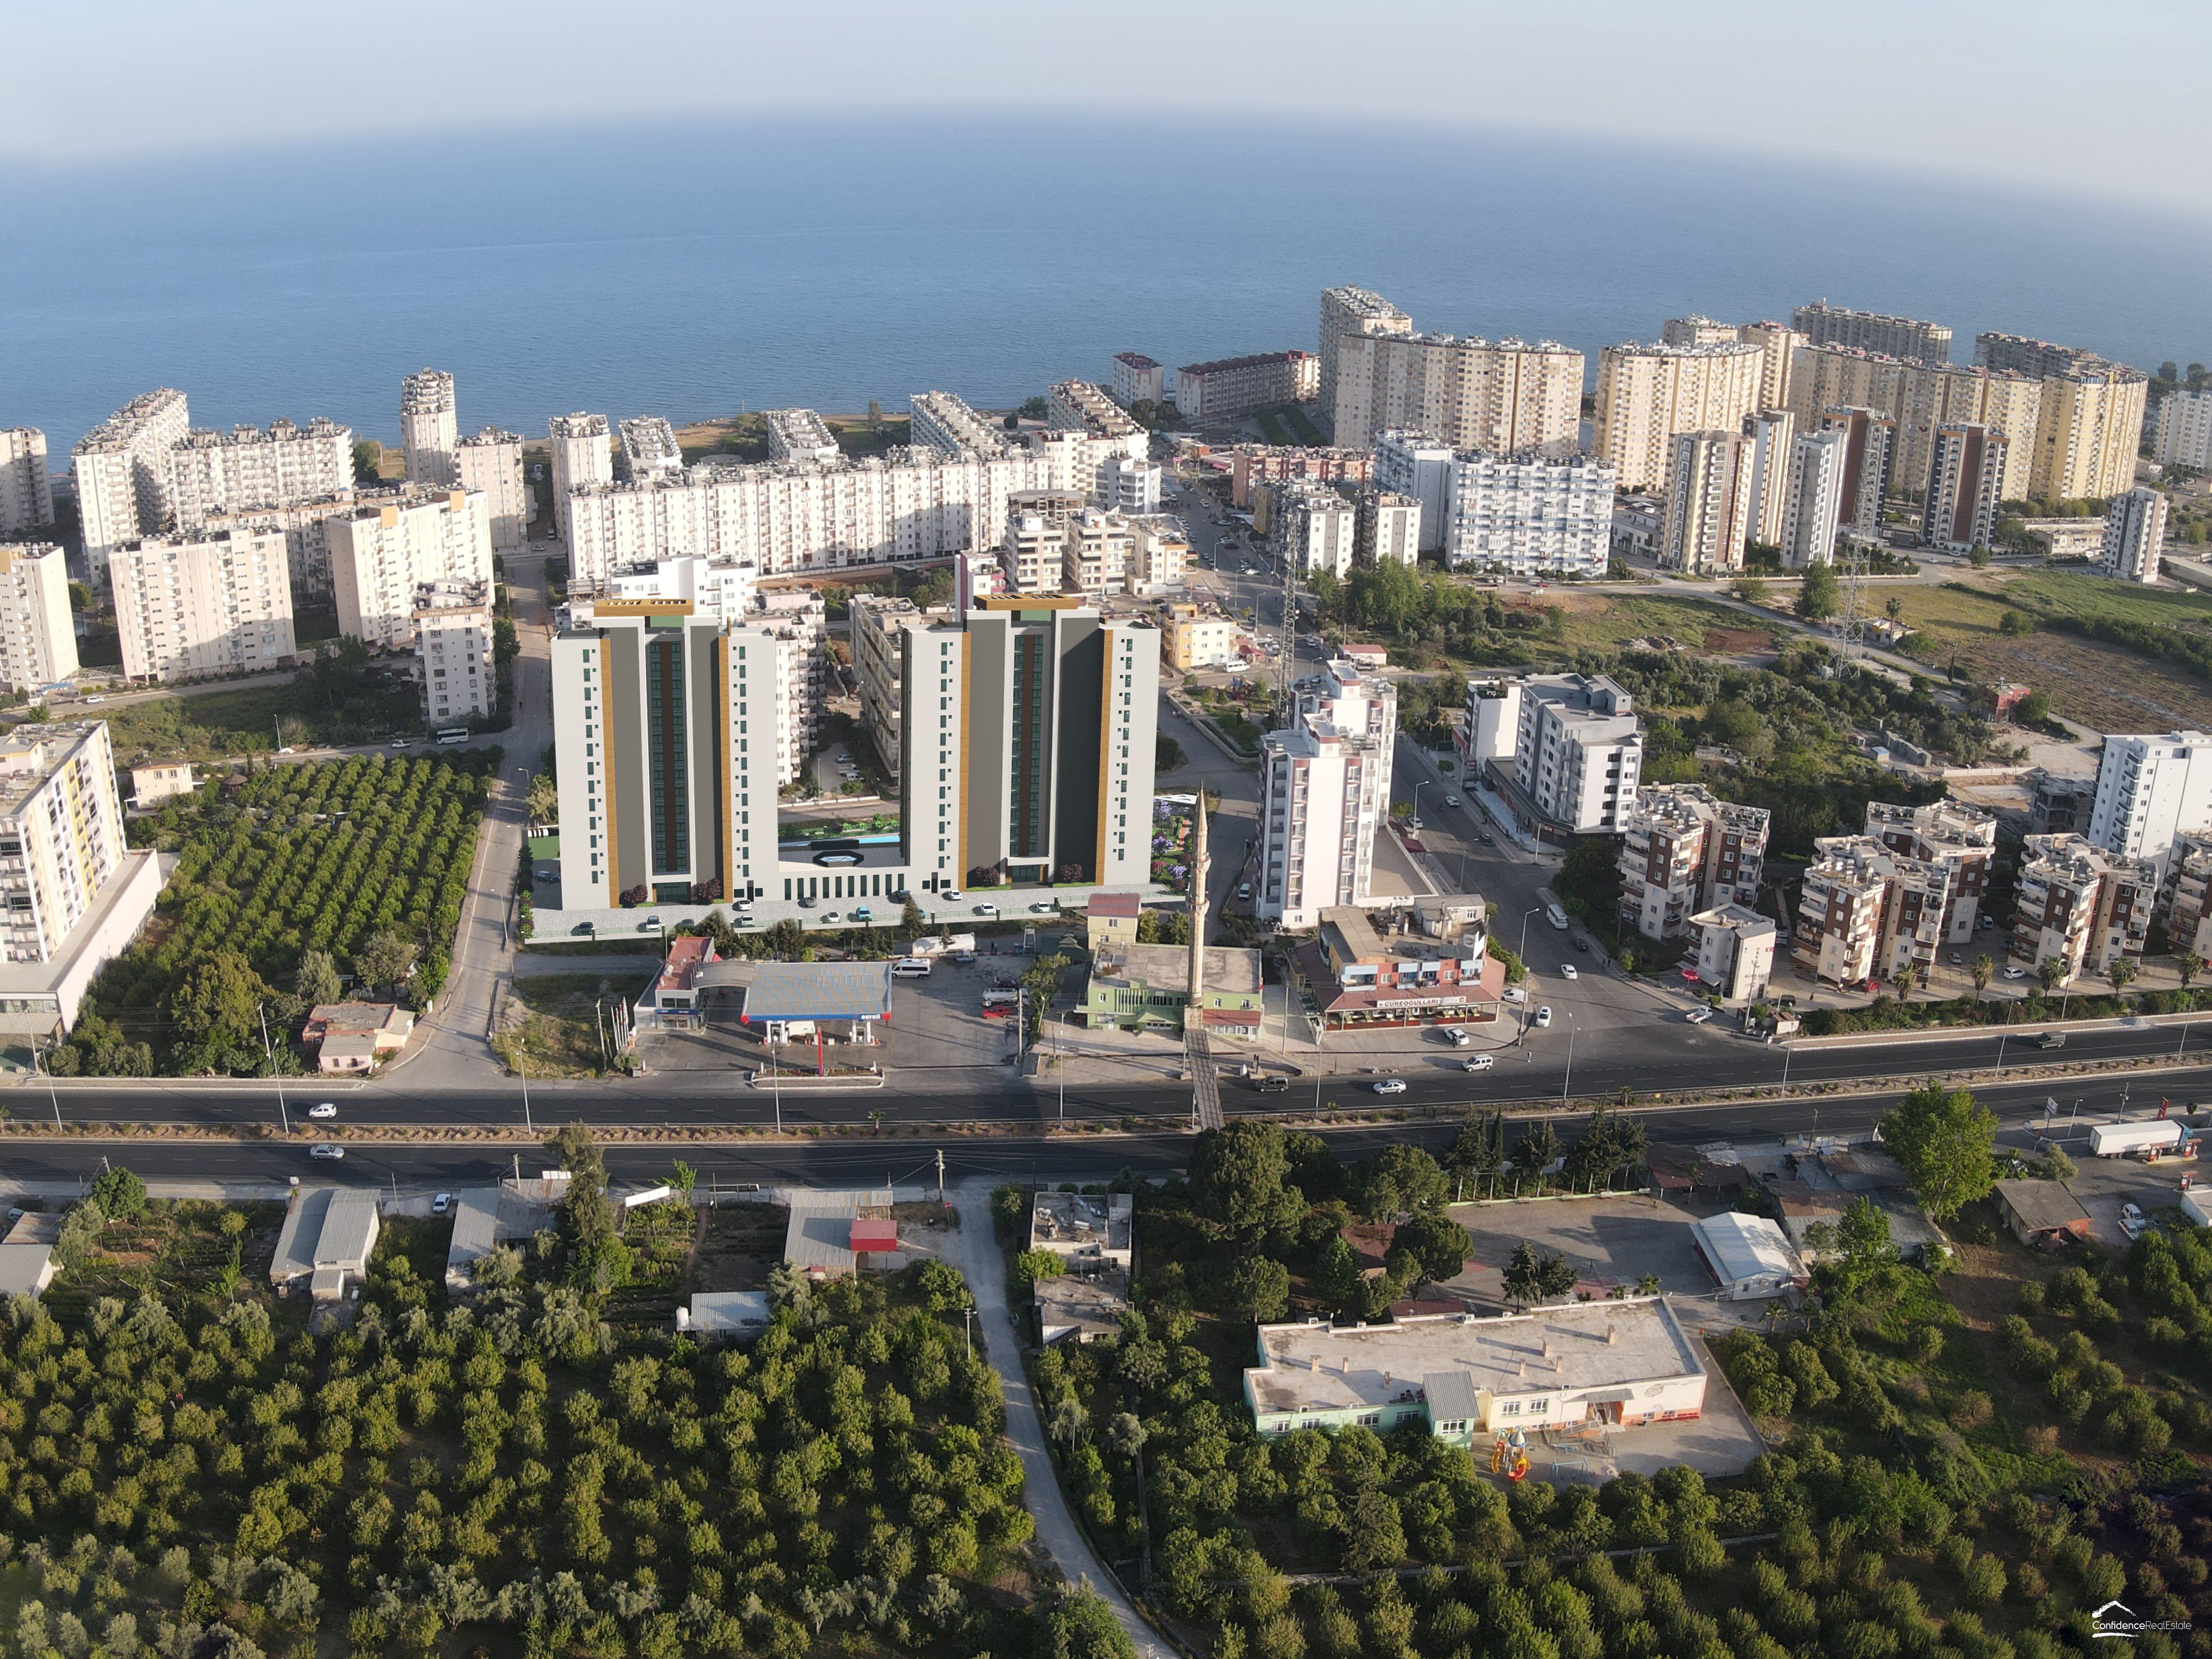 Project of a residential complex under construction in Mersin just 400 meters from the sea